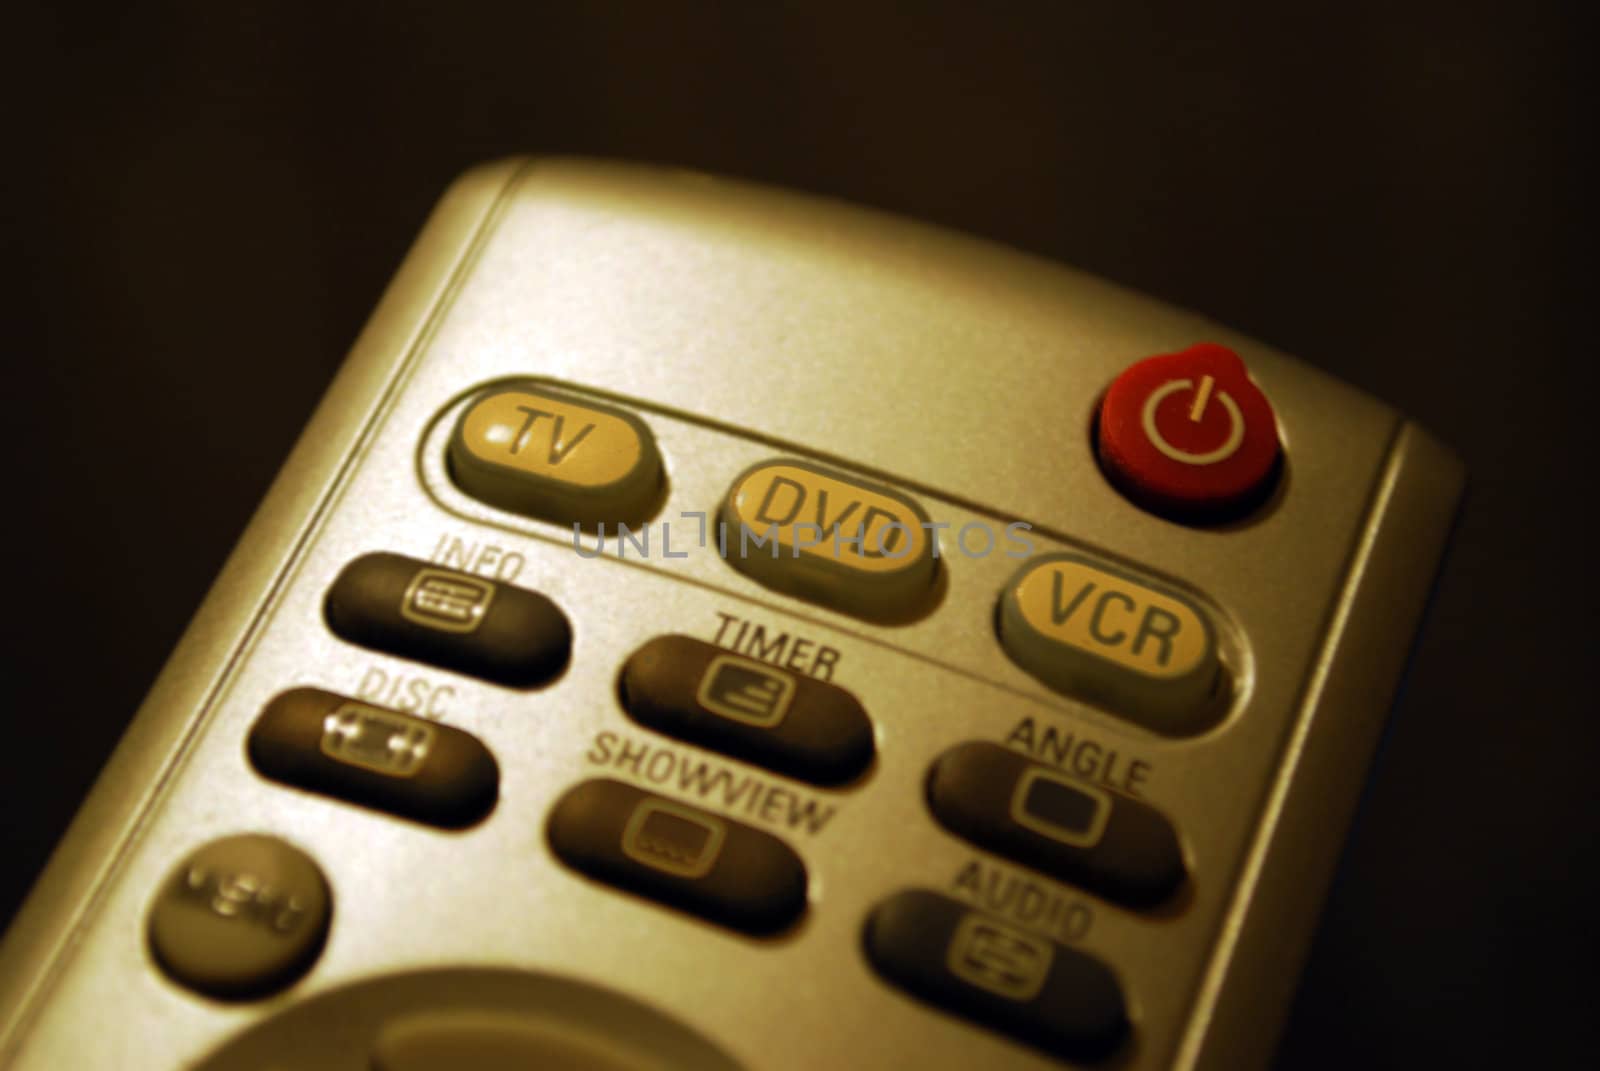 Universal remote control for TV, DVD, VCR etc.